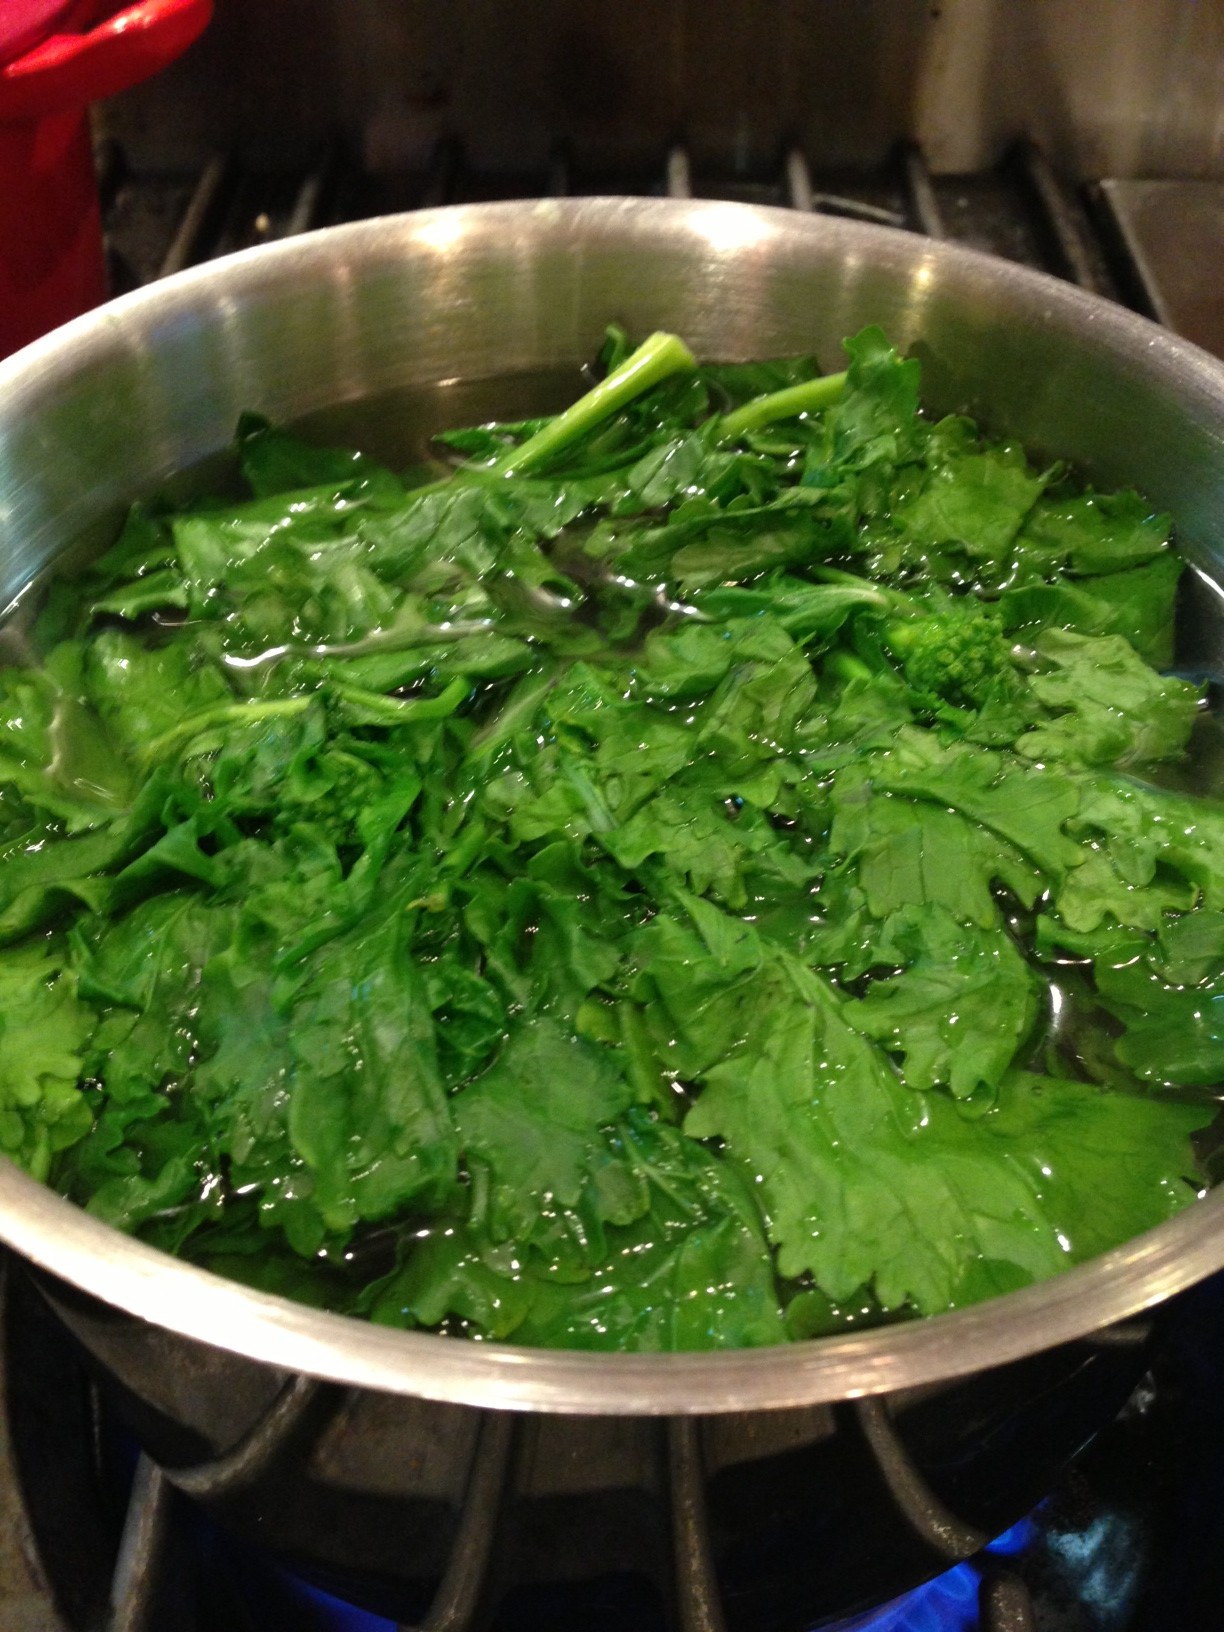 For the broccoli rabe, blanche it briefly in boiling waterâ€¦